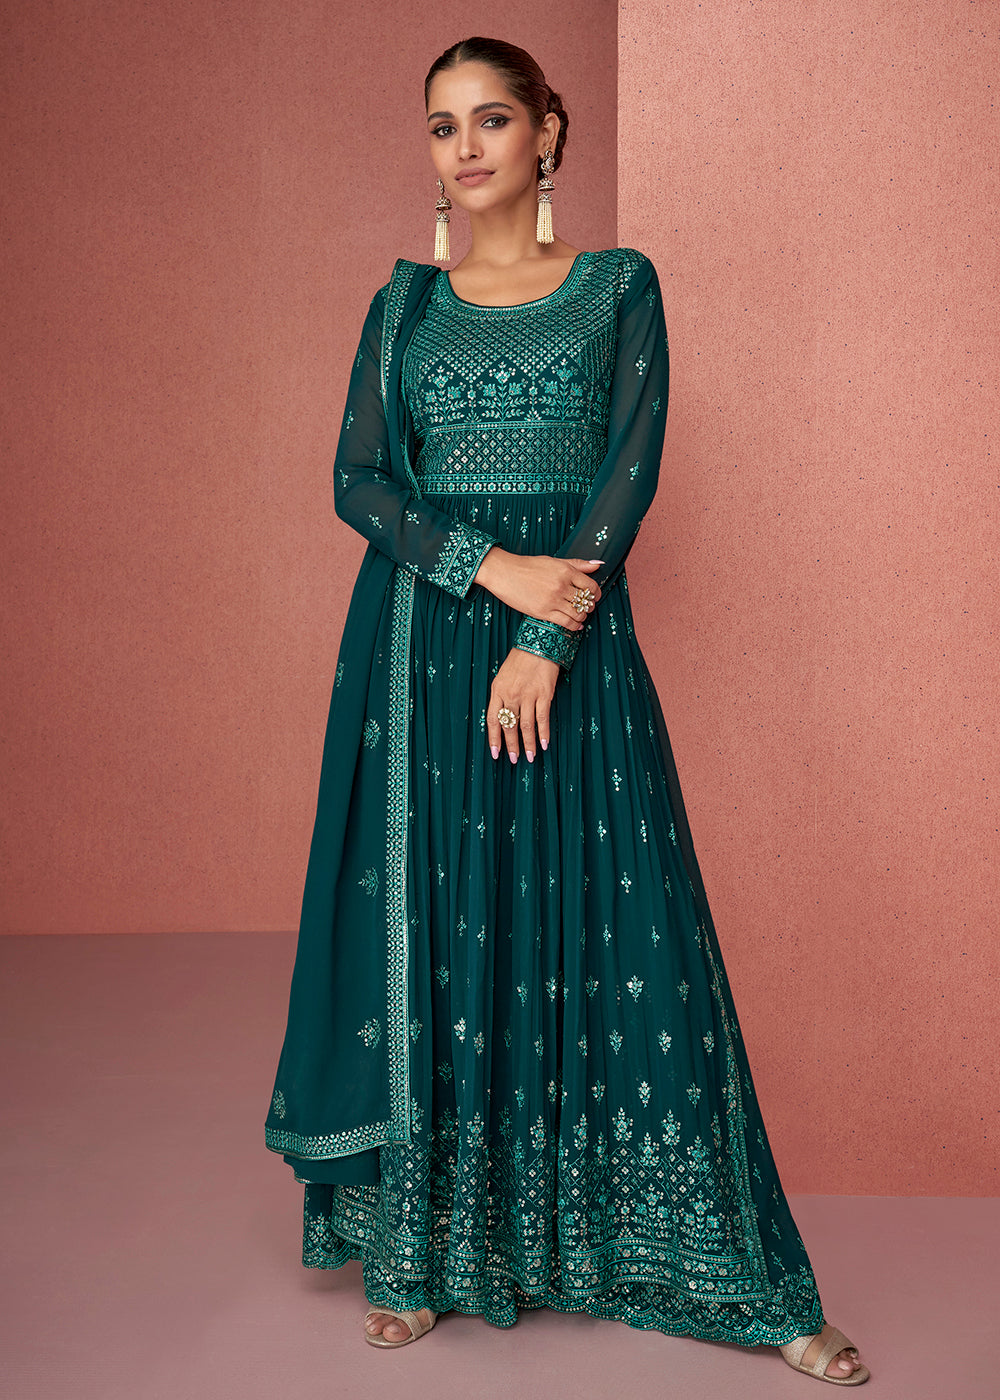 Buy Now Teal Green Anarkali Style Georgette Embellished Palazzo Salwar Suit Online in USA, UK, Canada & Worldwide at Empress Clothing.